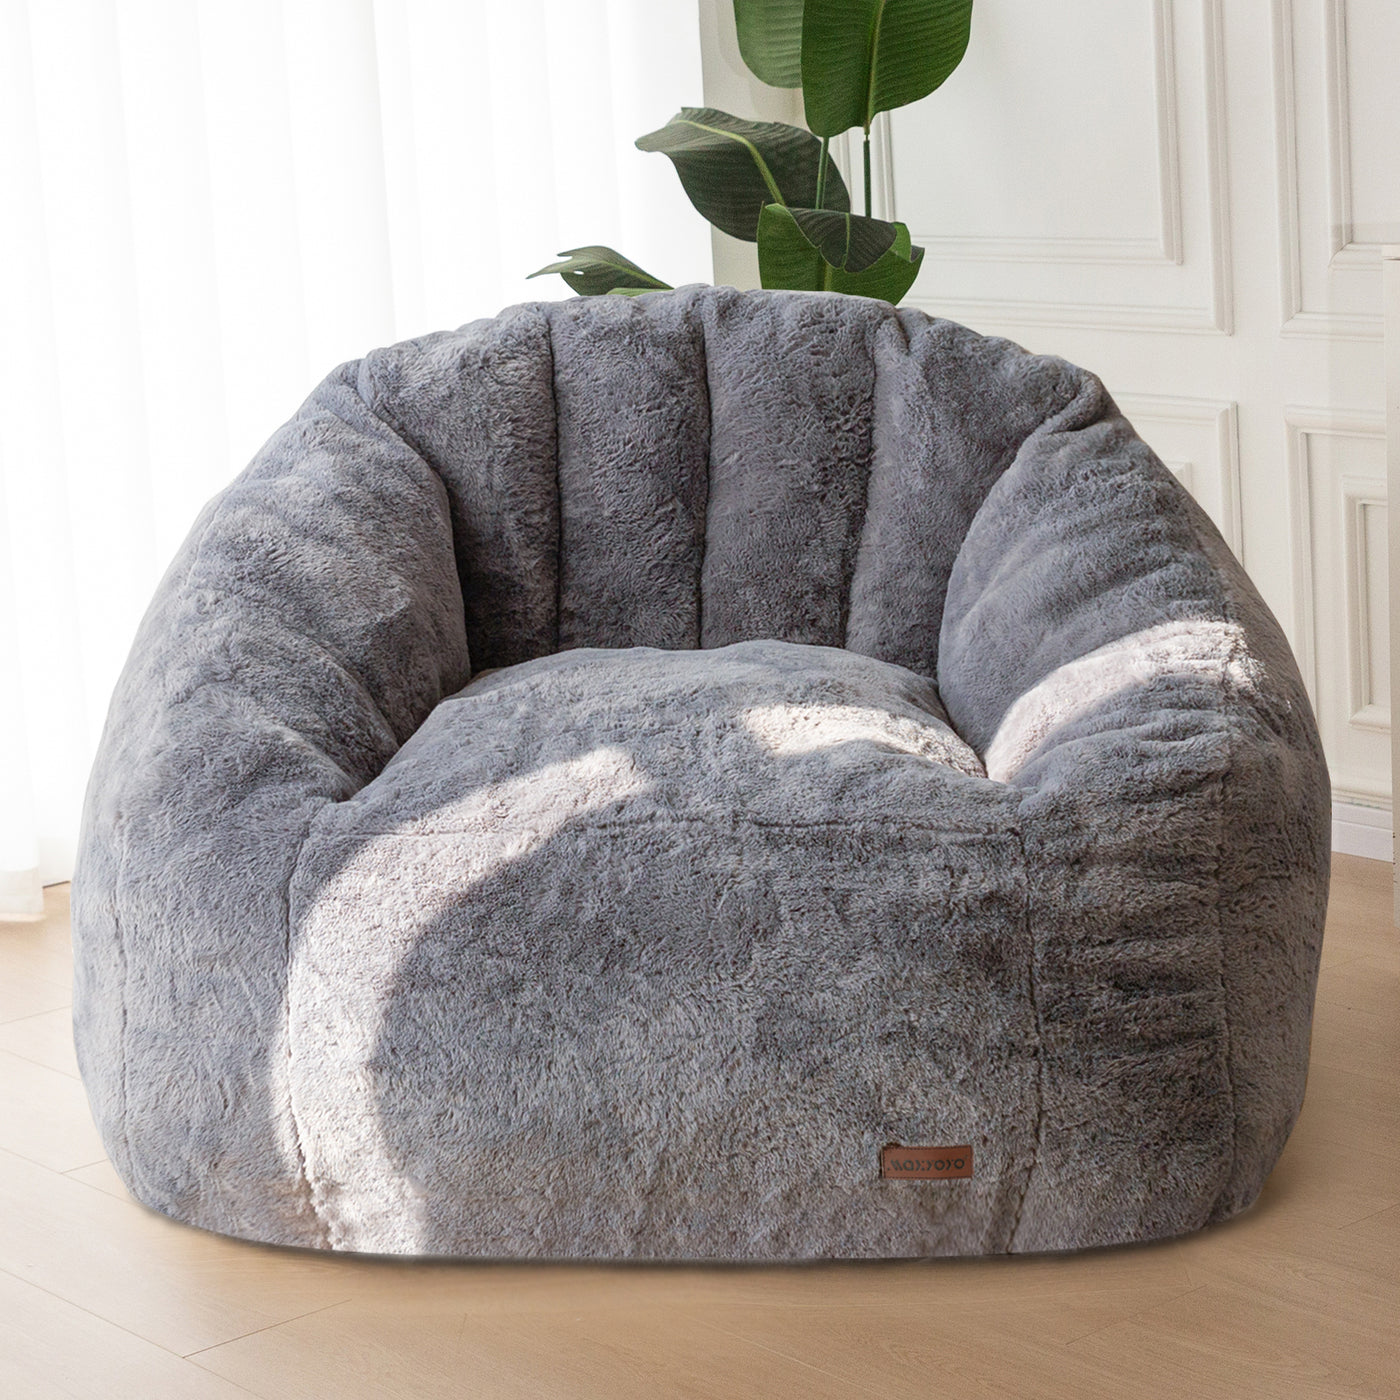 MAXYOYO Giant Bean Bag Chair, Faux Fur Shell-Shaped Oversized Bean Bag Chair with Filler for Gaming, Reading (Dark Grey)